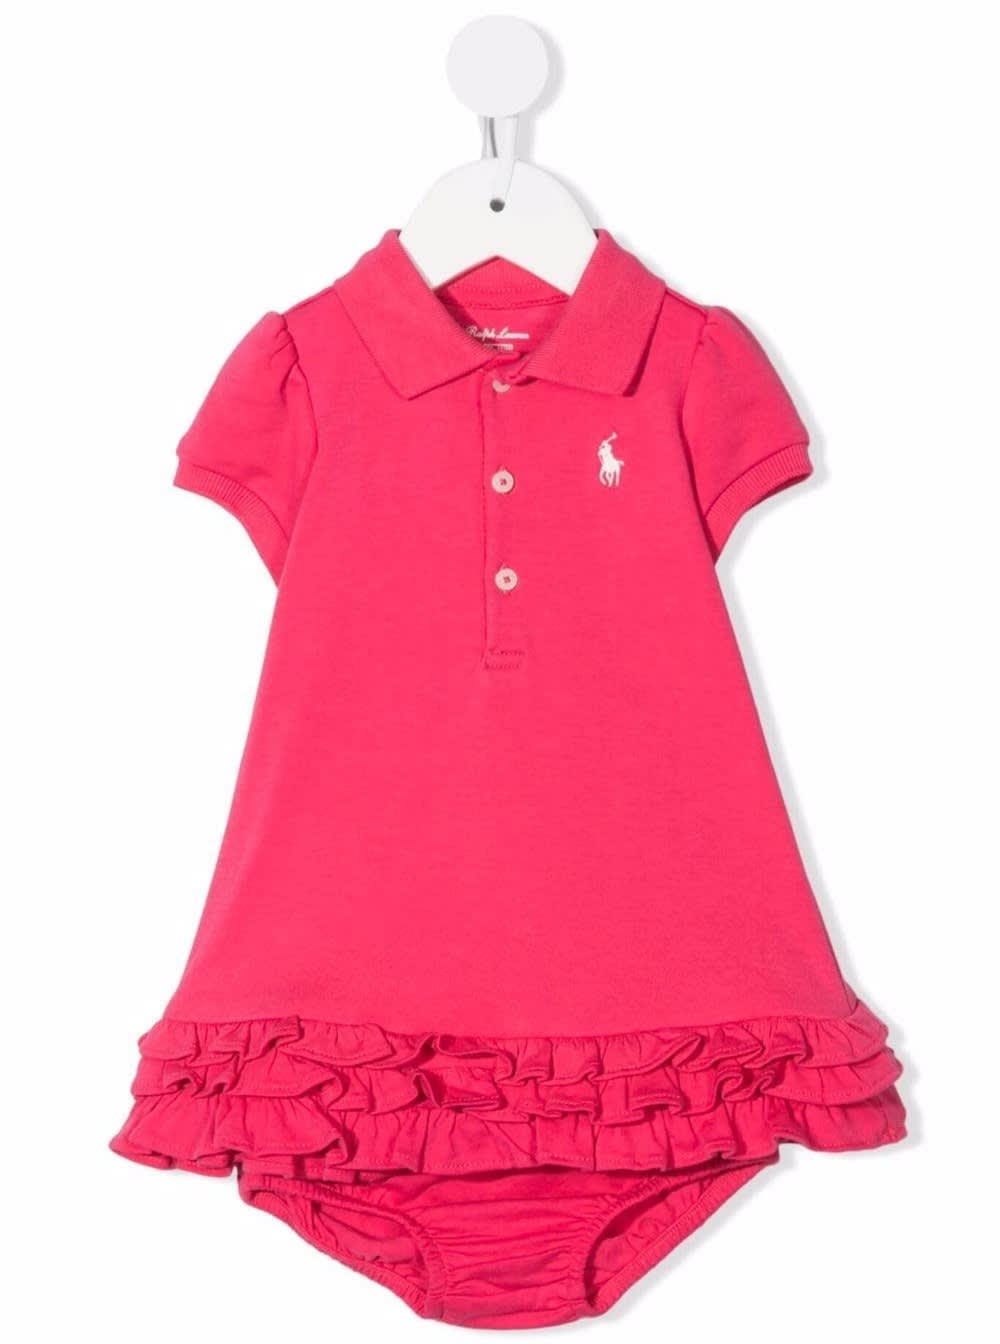 Polo Ralph Lauren Kids Baby Girls Pink Cotton Dress With Ruffled Details And Logo